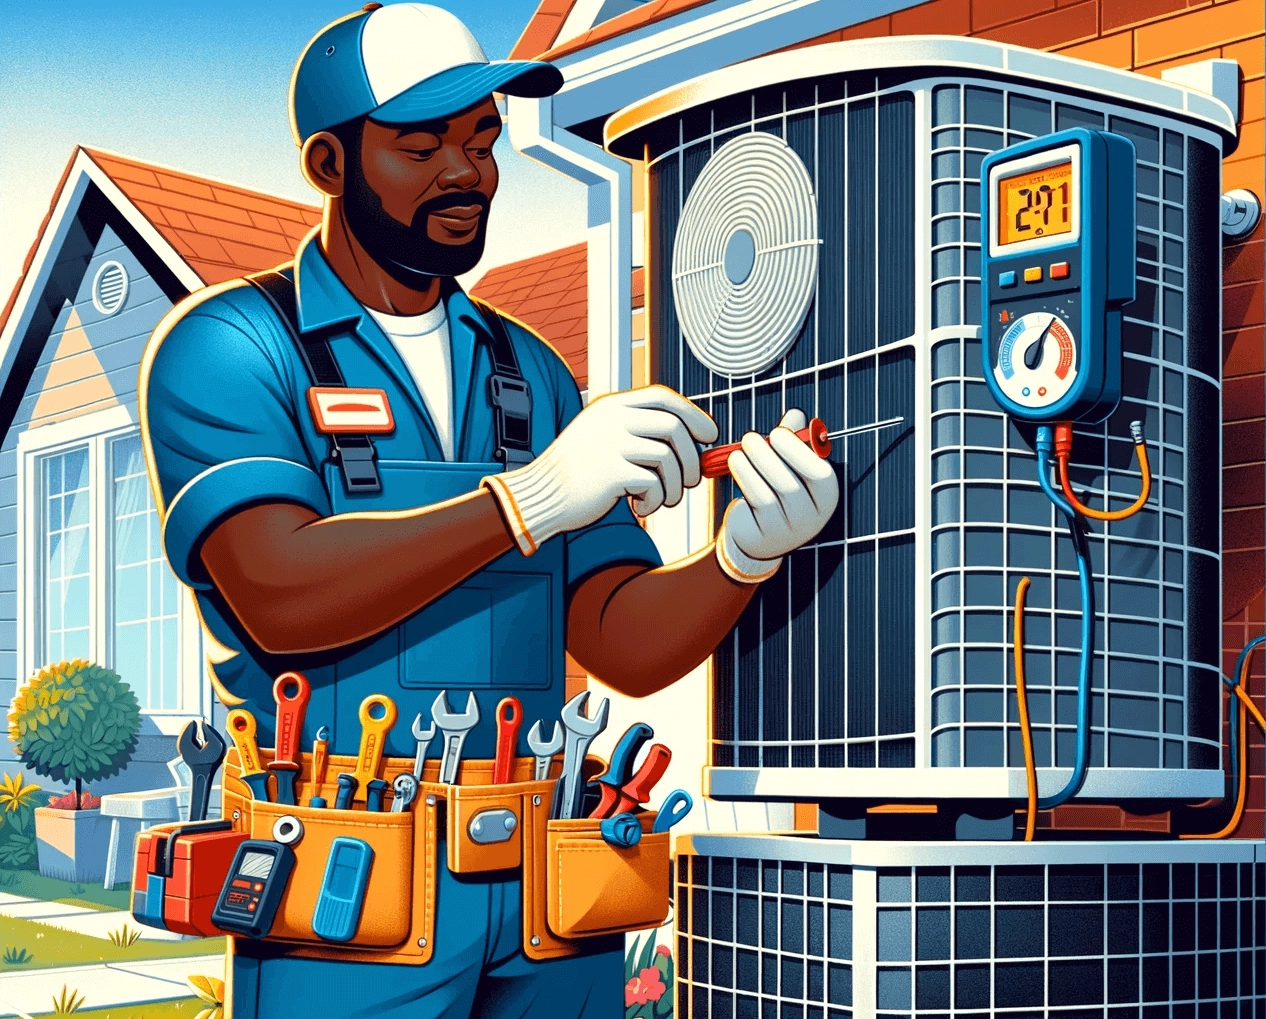 an animated, colorful illustration that depicts a middle-aged Black male technician in a blue uniform, working on an air conditioning unit in a residential setting.